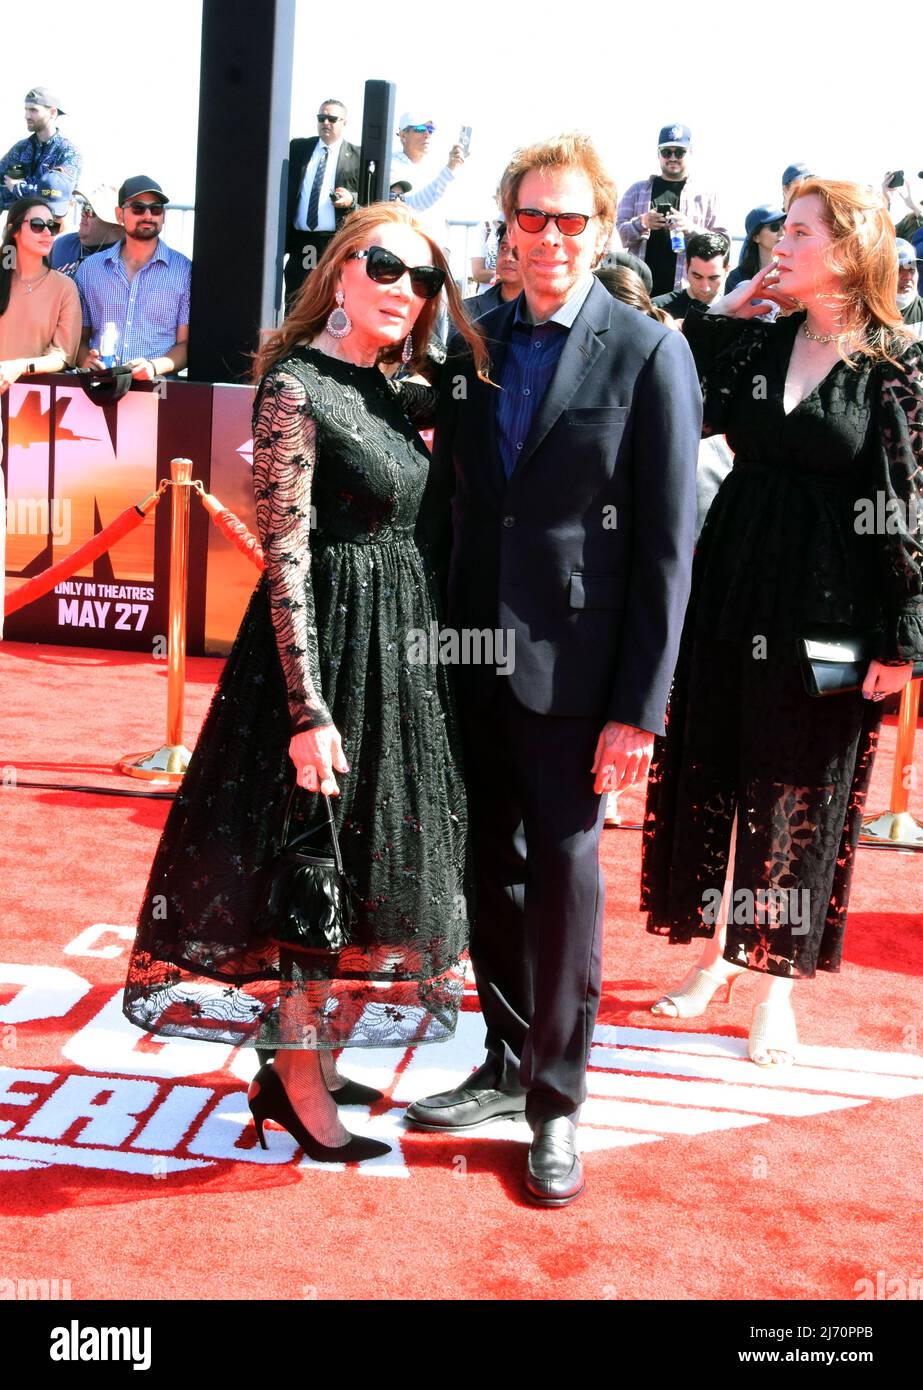 San Diego, California, USA 4th May 2022 Producer Jerry Bruckheimer and wife Linda Bruckheimer attend The Global Premiere of Top Gun: Maverick at USS MIDWAY on May 4, 2022 in San Diego, California, USA. Photo by Barry King/Alamy Live News Stock Photo